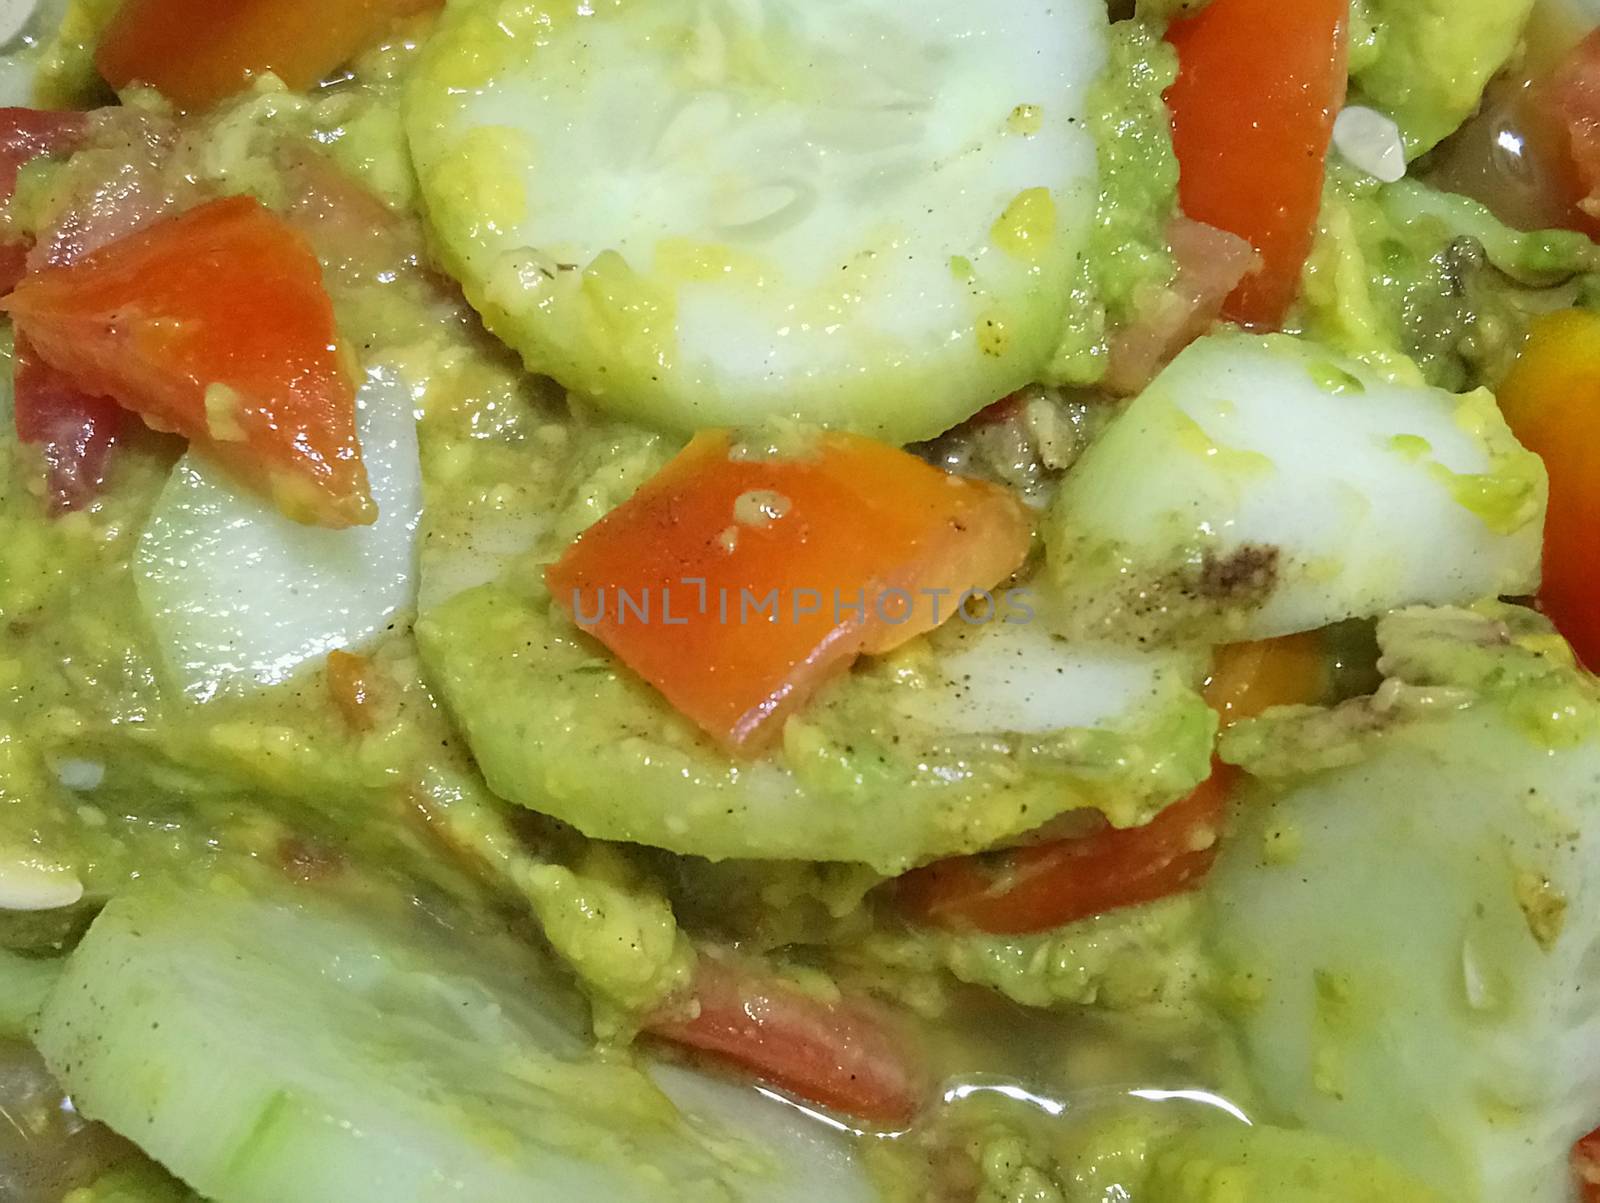 Cucumber with tomato and vinegar vegetable salad mix by imwaltersy